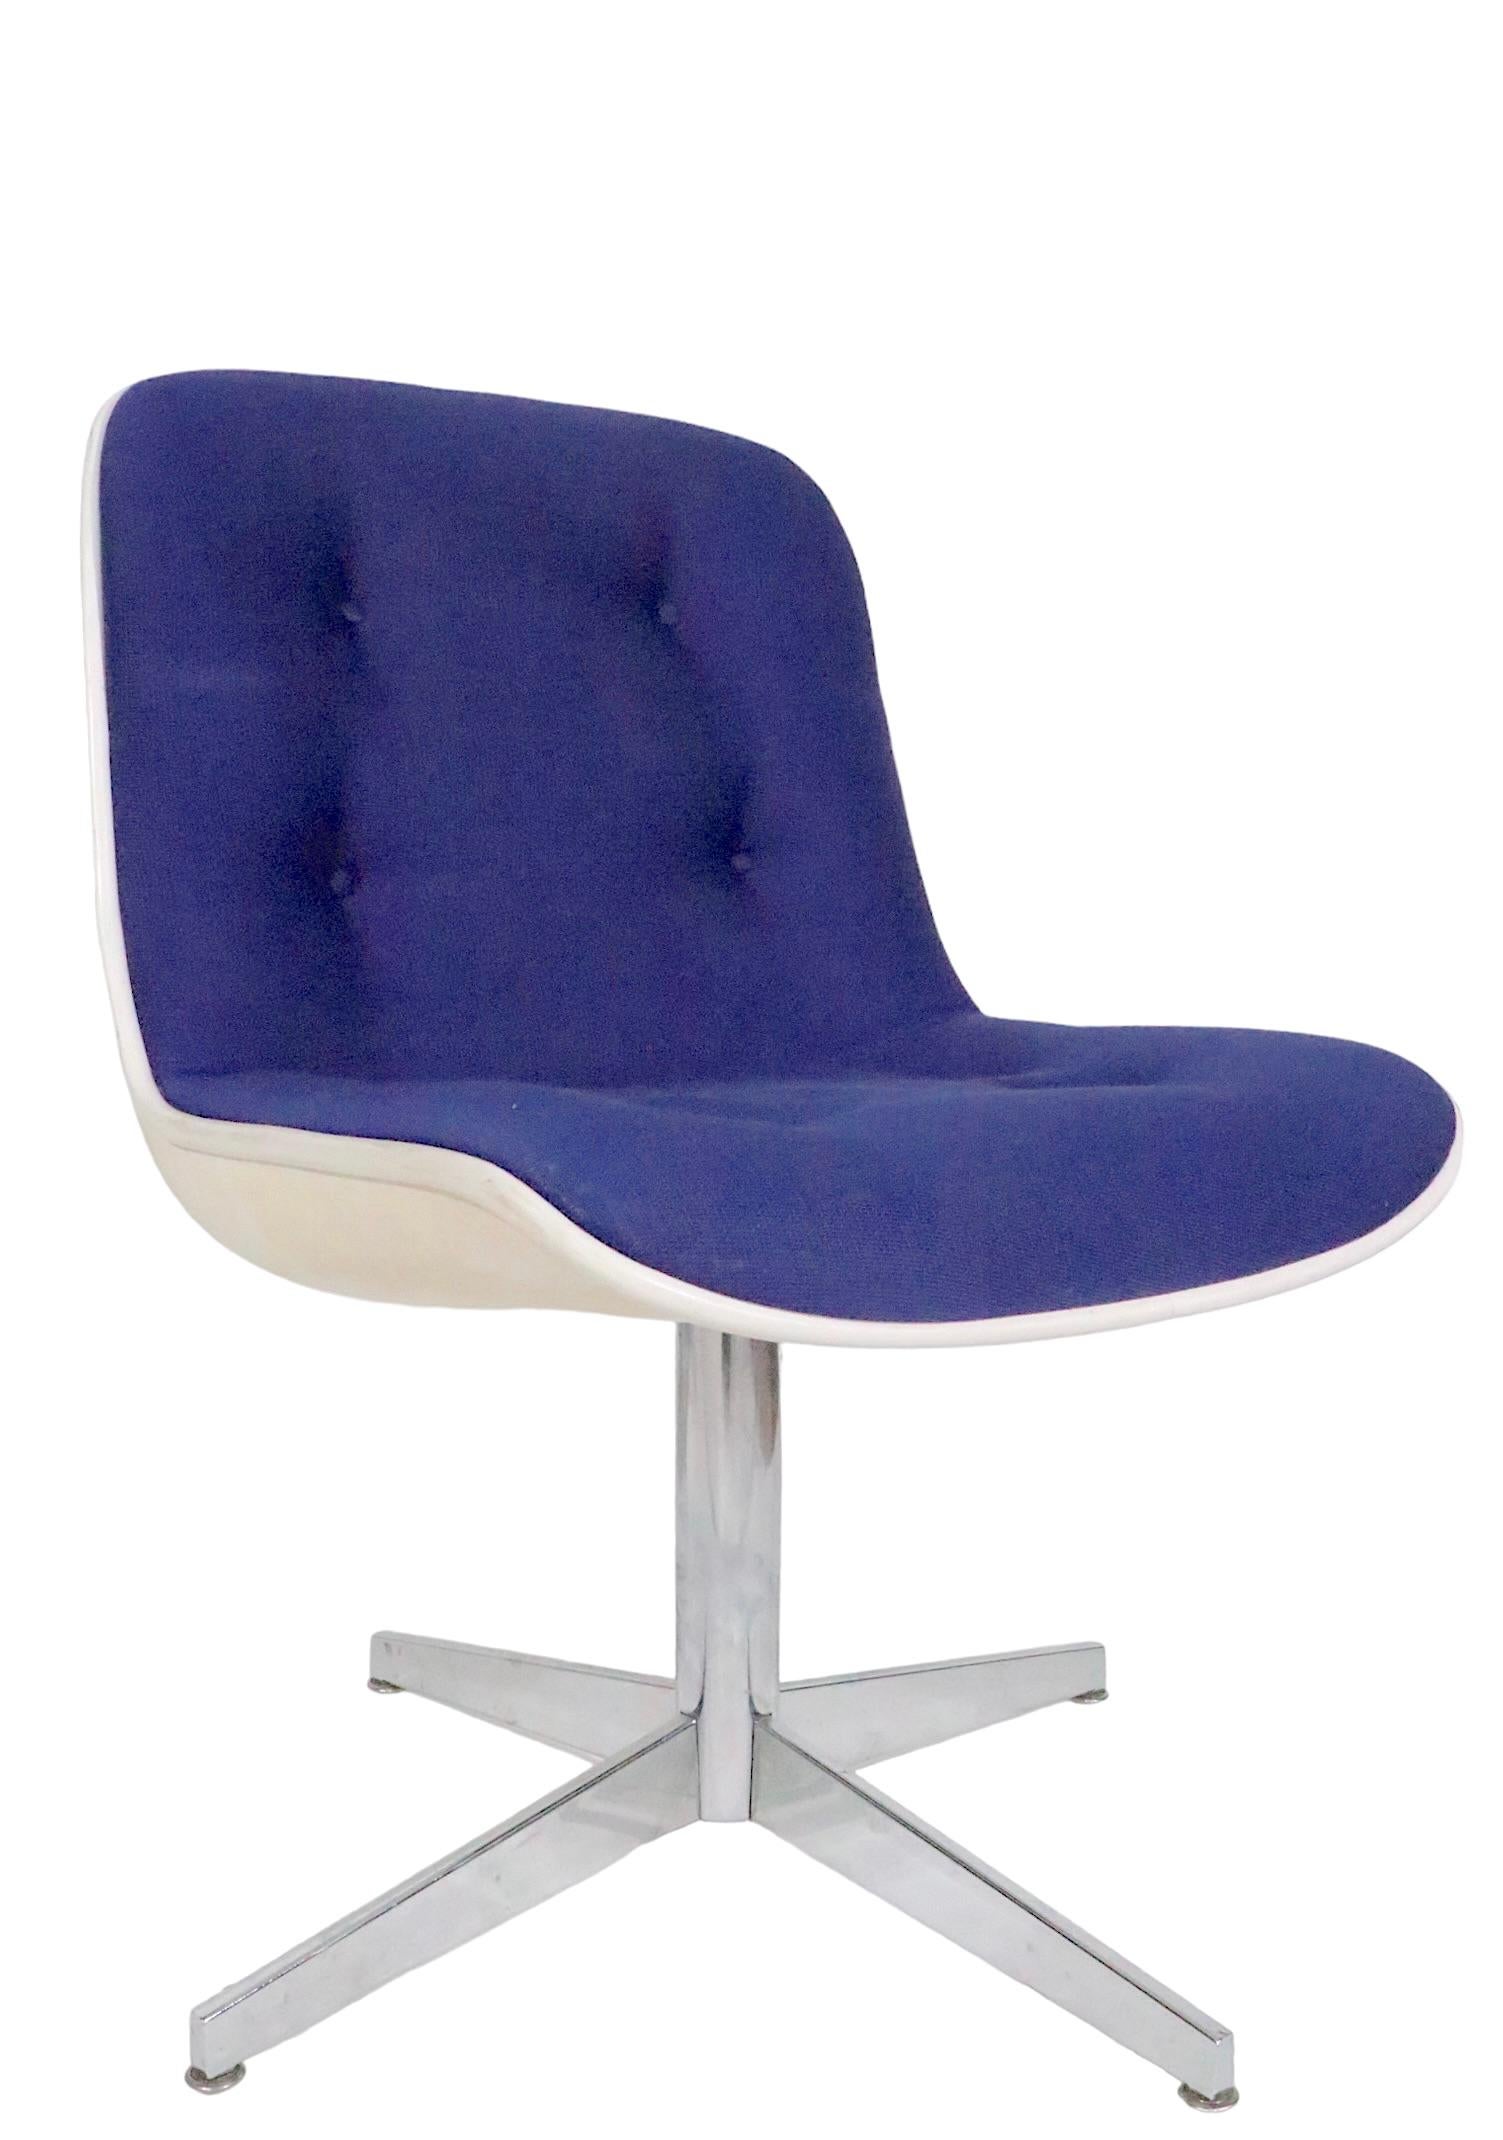 Steelcase Swivel  Chairs in the style of Pollack c.1970's 6 available In Good Condition For Sale In New York, NY